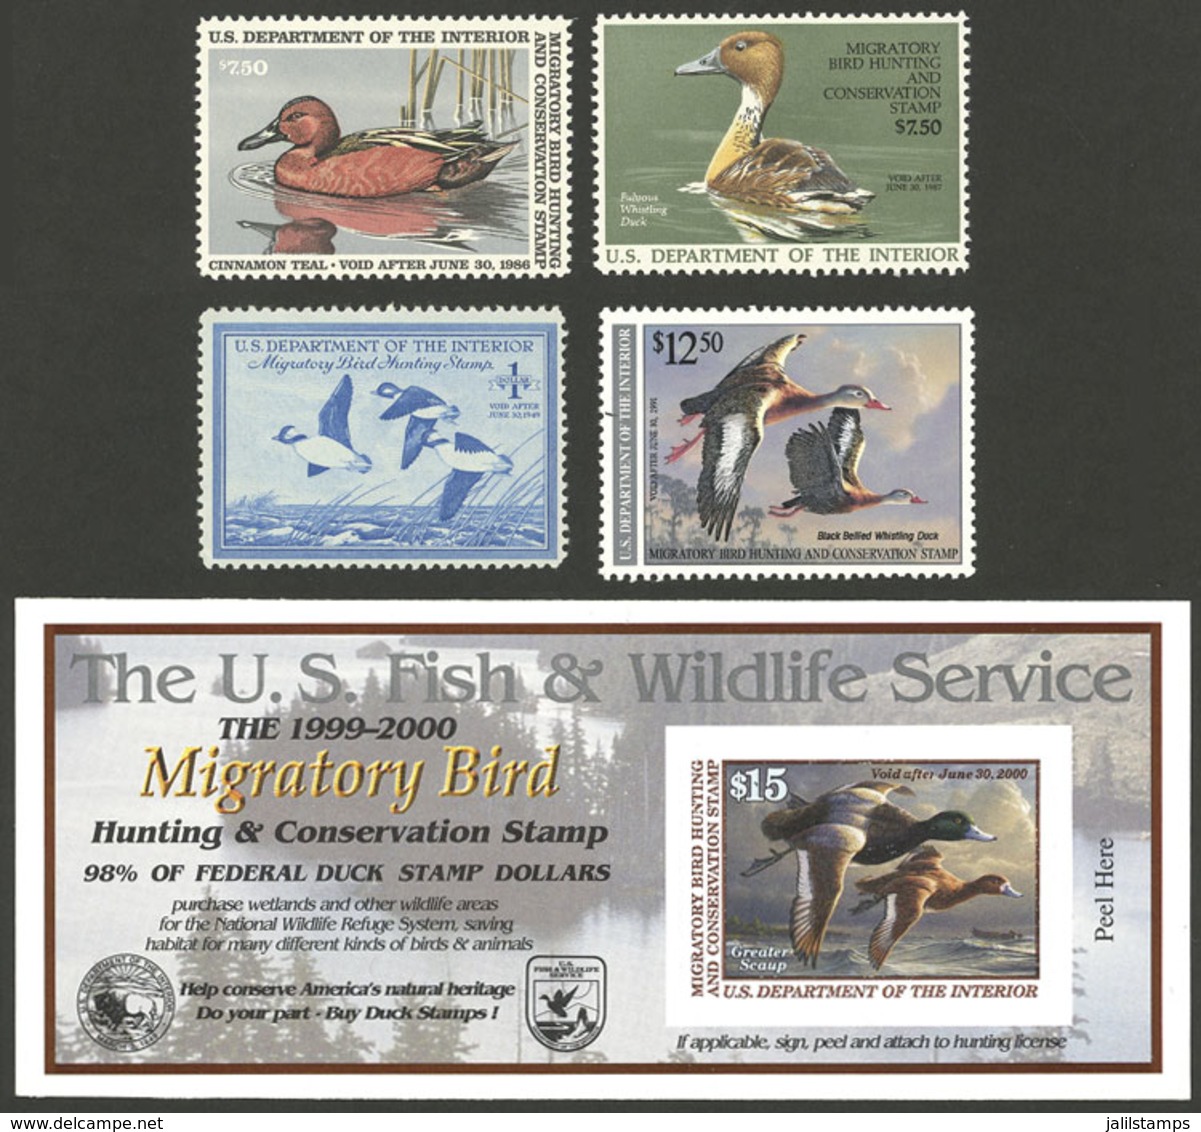 UNITED STATES: HUNTING PERMIT STAMPS: 4 Revenue Stamps + 1 Sheet, All MNH And Of Excellent Quality! - Steuermarken